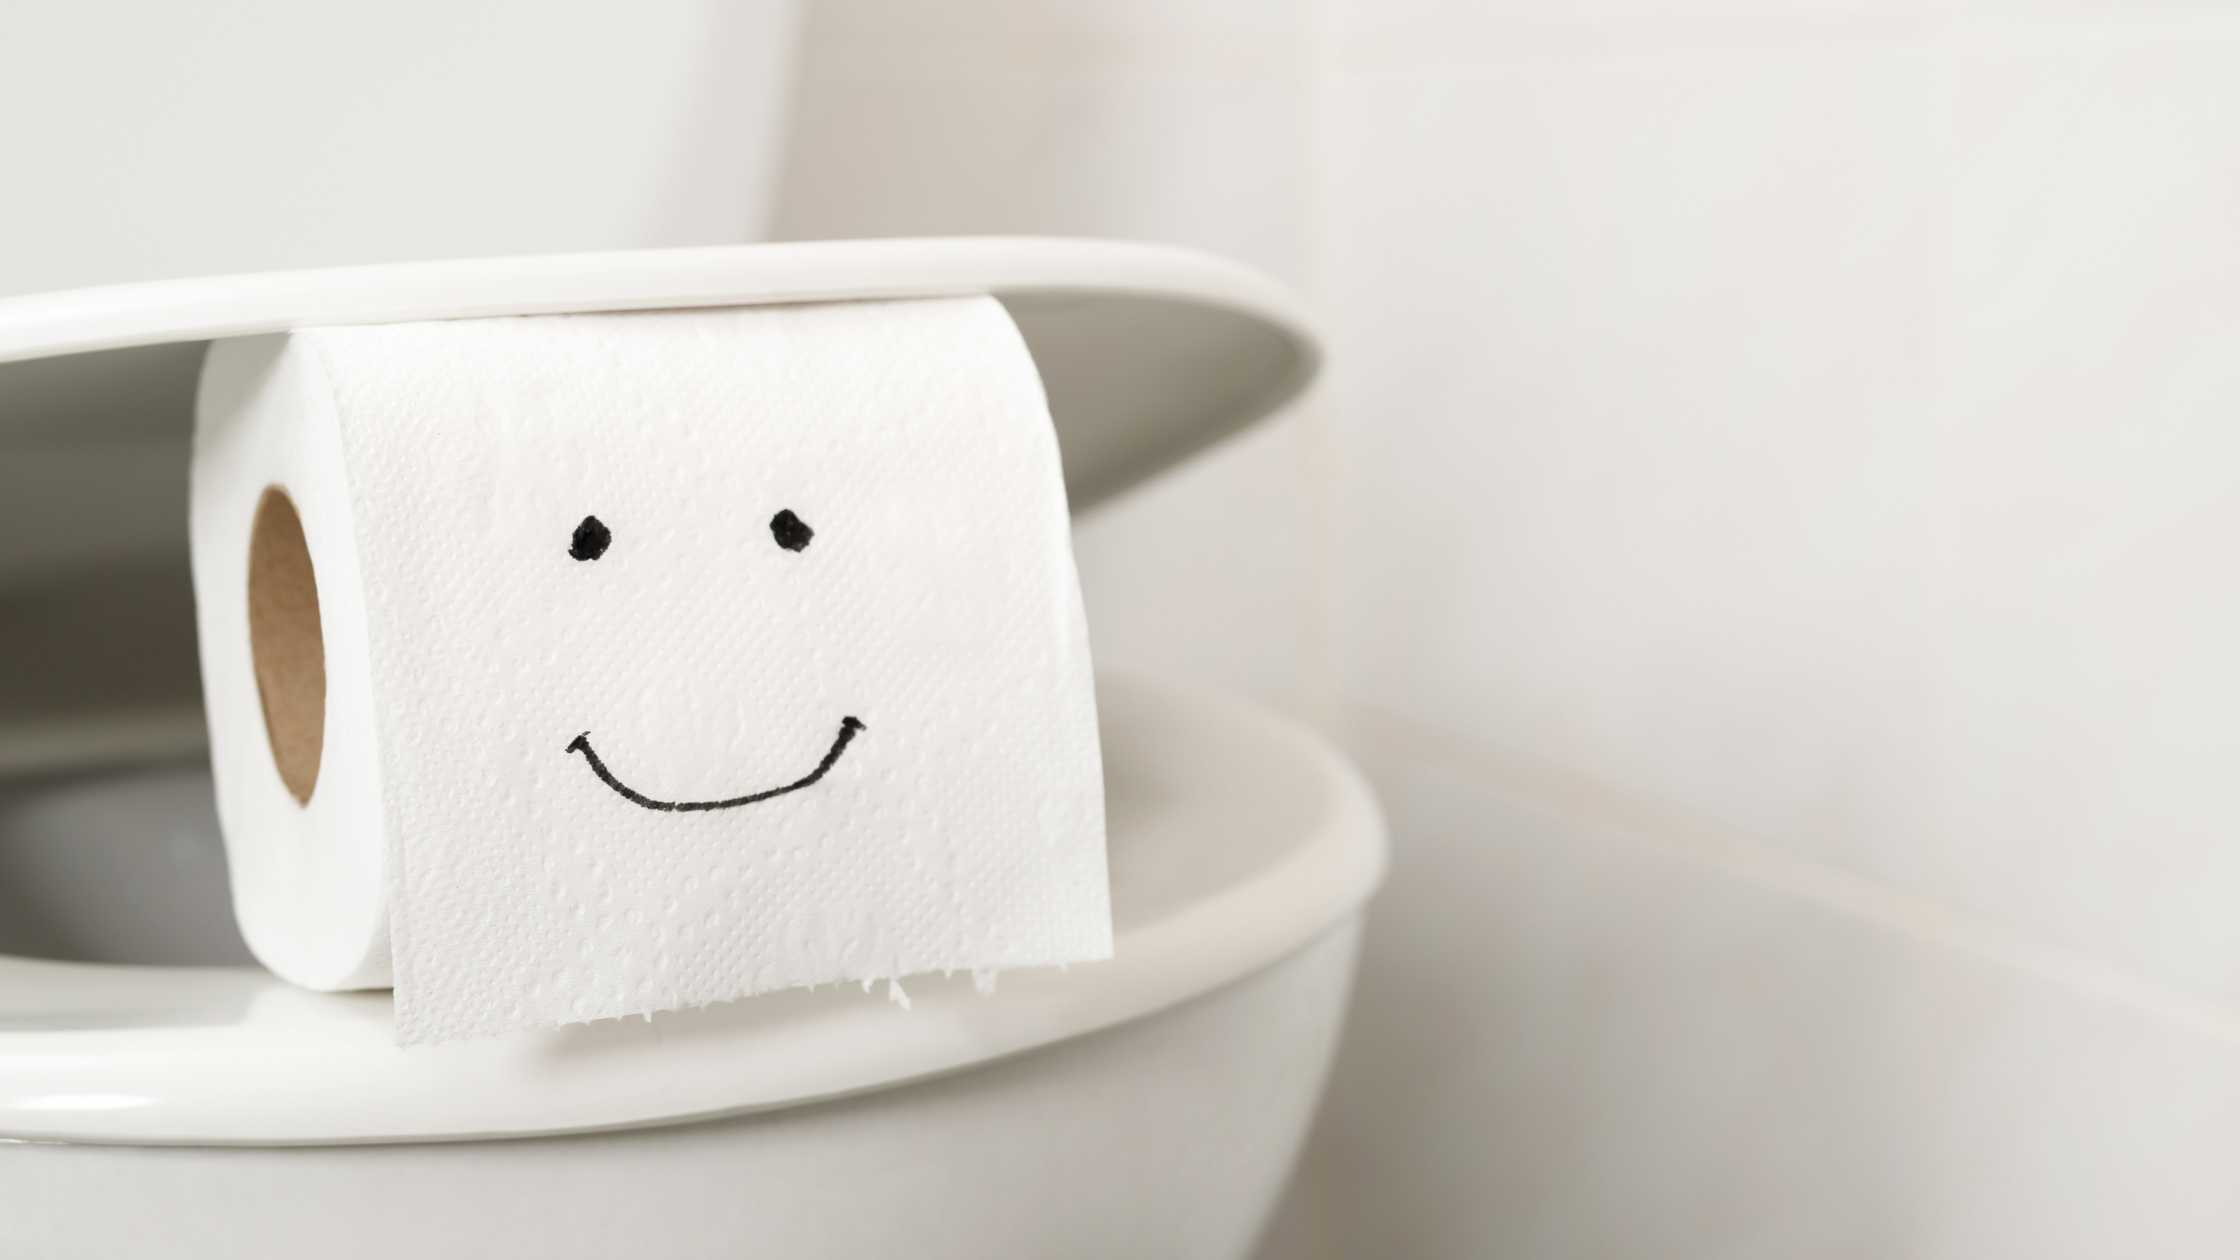 Toilet Do’s and Don’ts